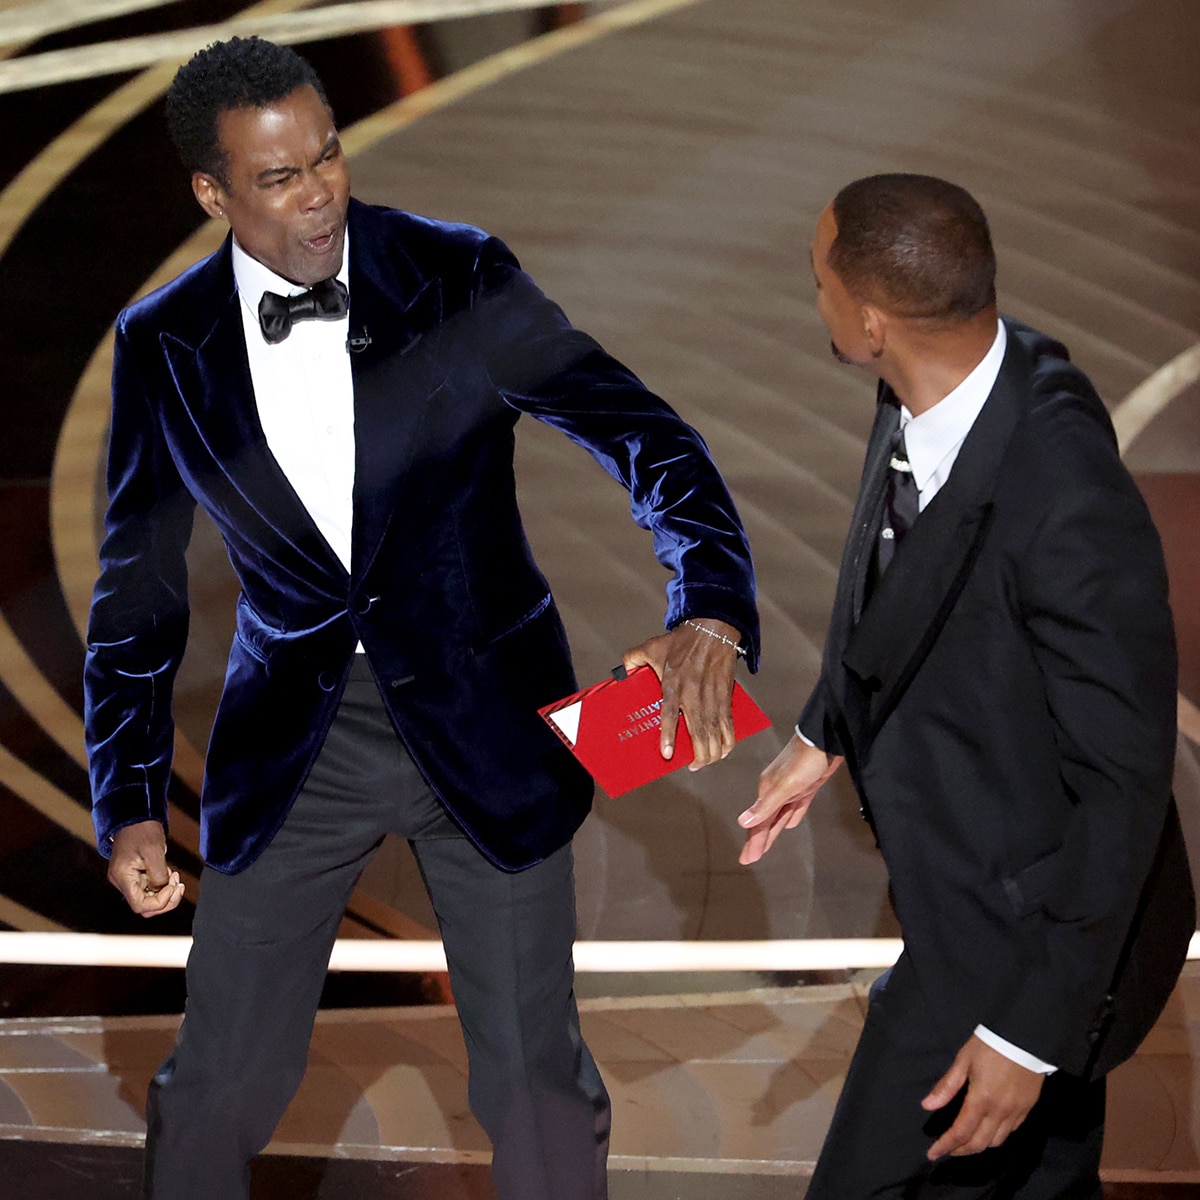 Chris Rock Has Not Filed Police Report After Will Smith Slap at Oscars